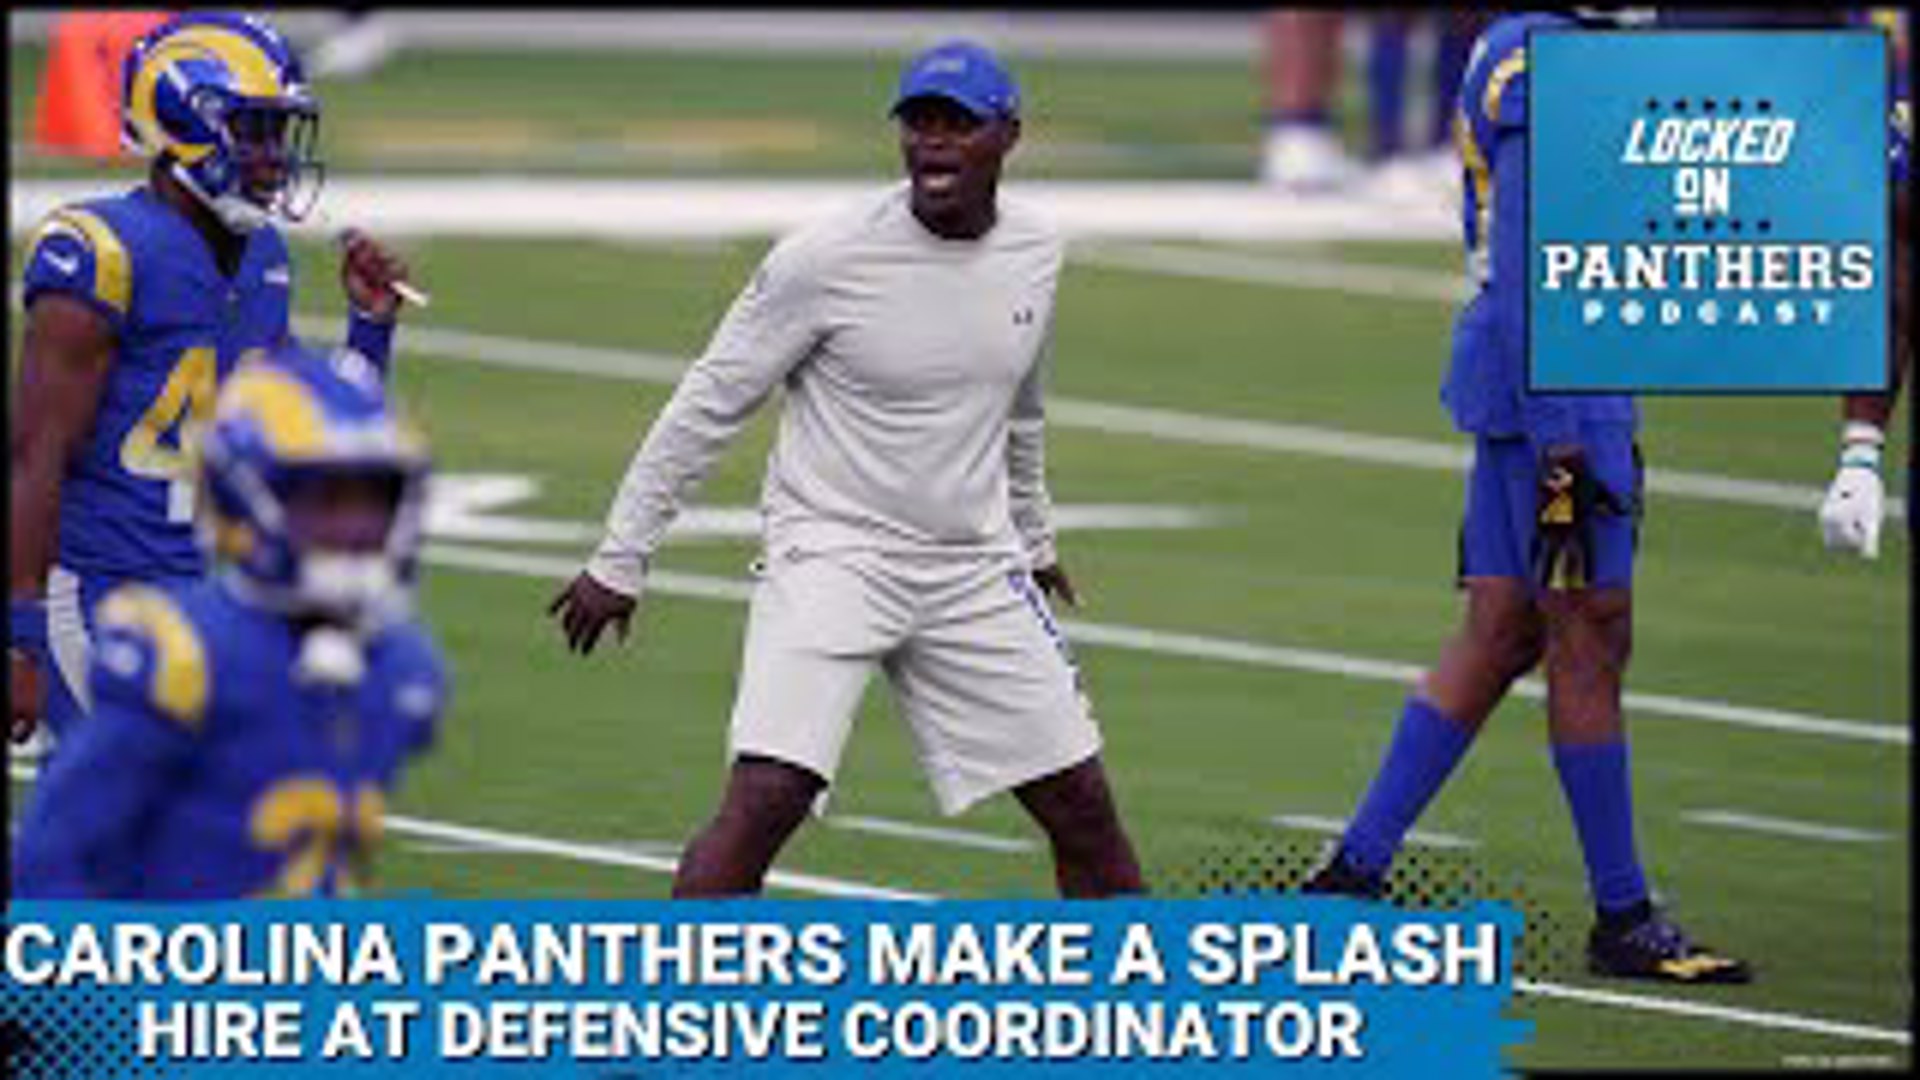 The Panthers came to terms on Sunday with Denver Broncos defensive coordinator Ejiro Evero to lead the team's defense in 2023. That and more on Locked On Panthers